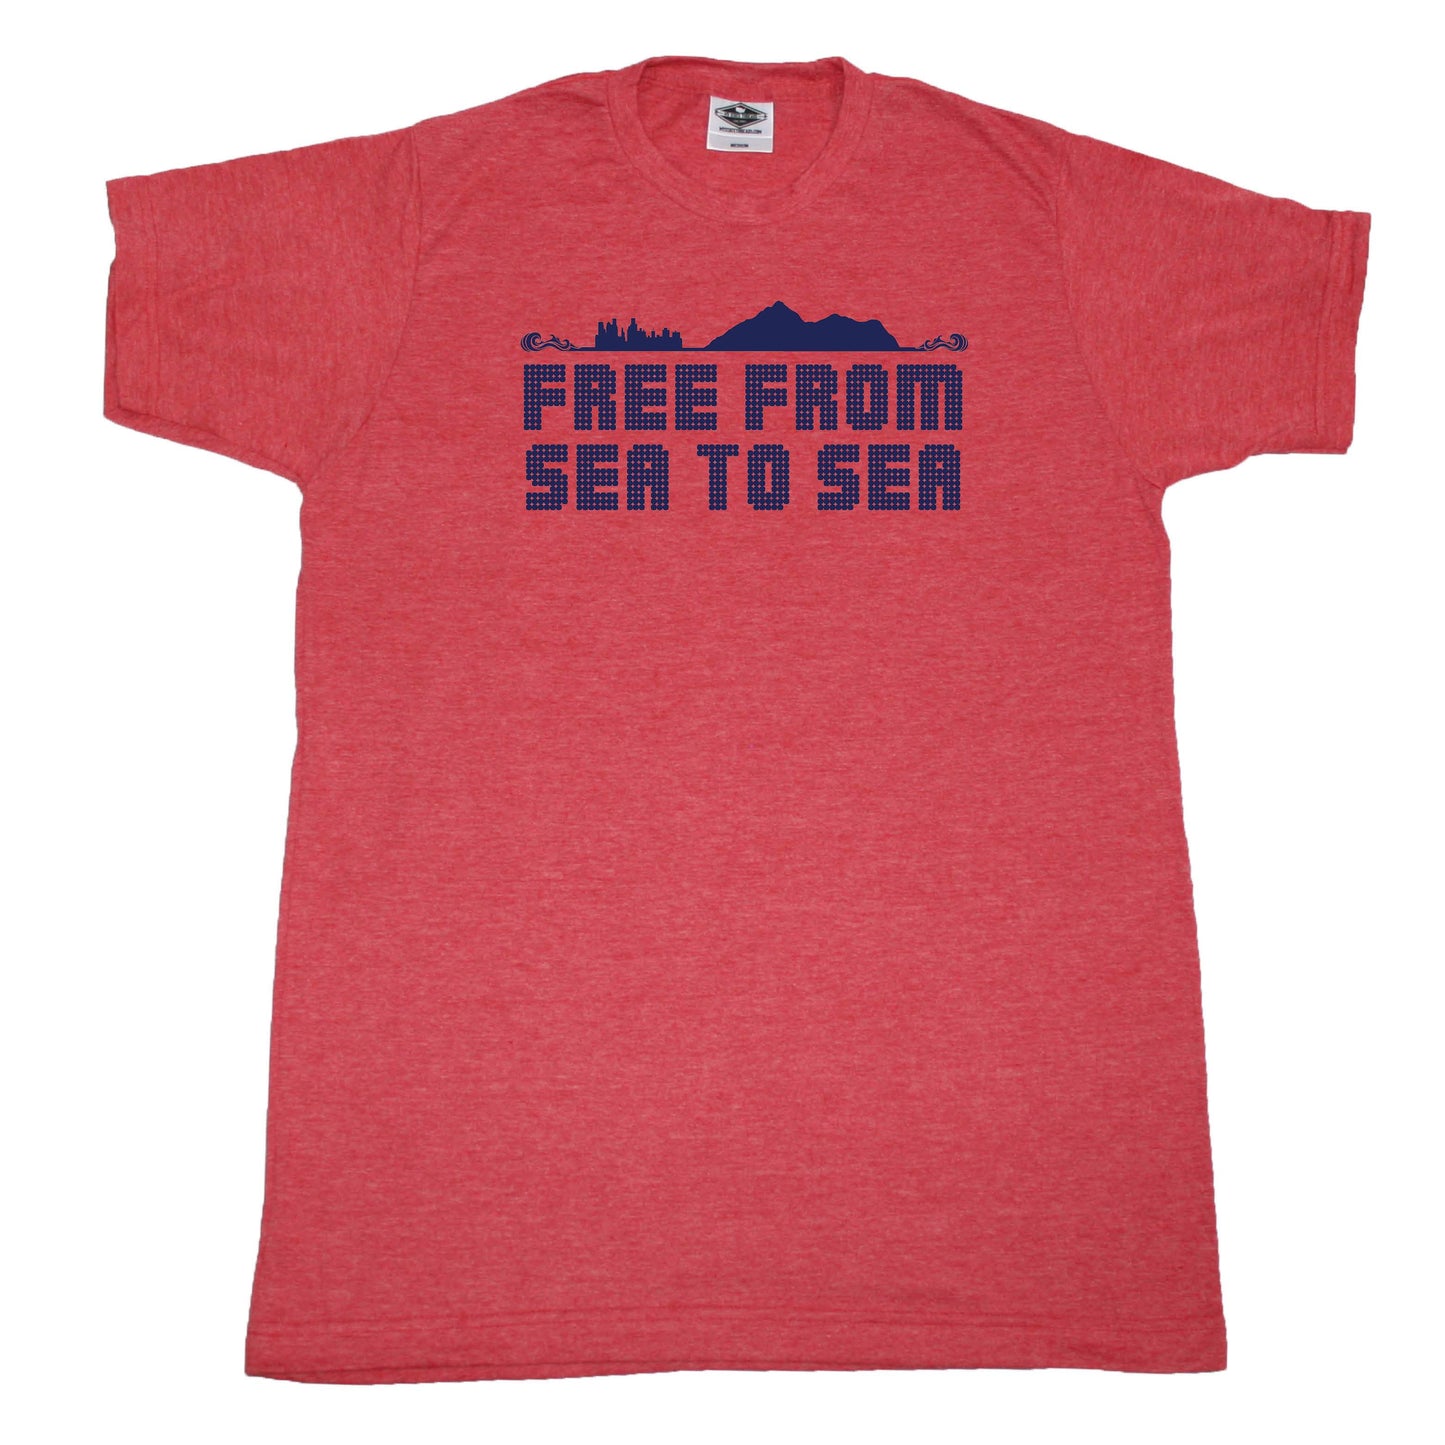 Free From Sea to Sea - Unisex Tee